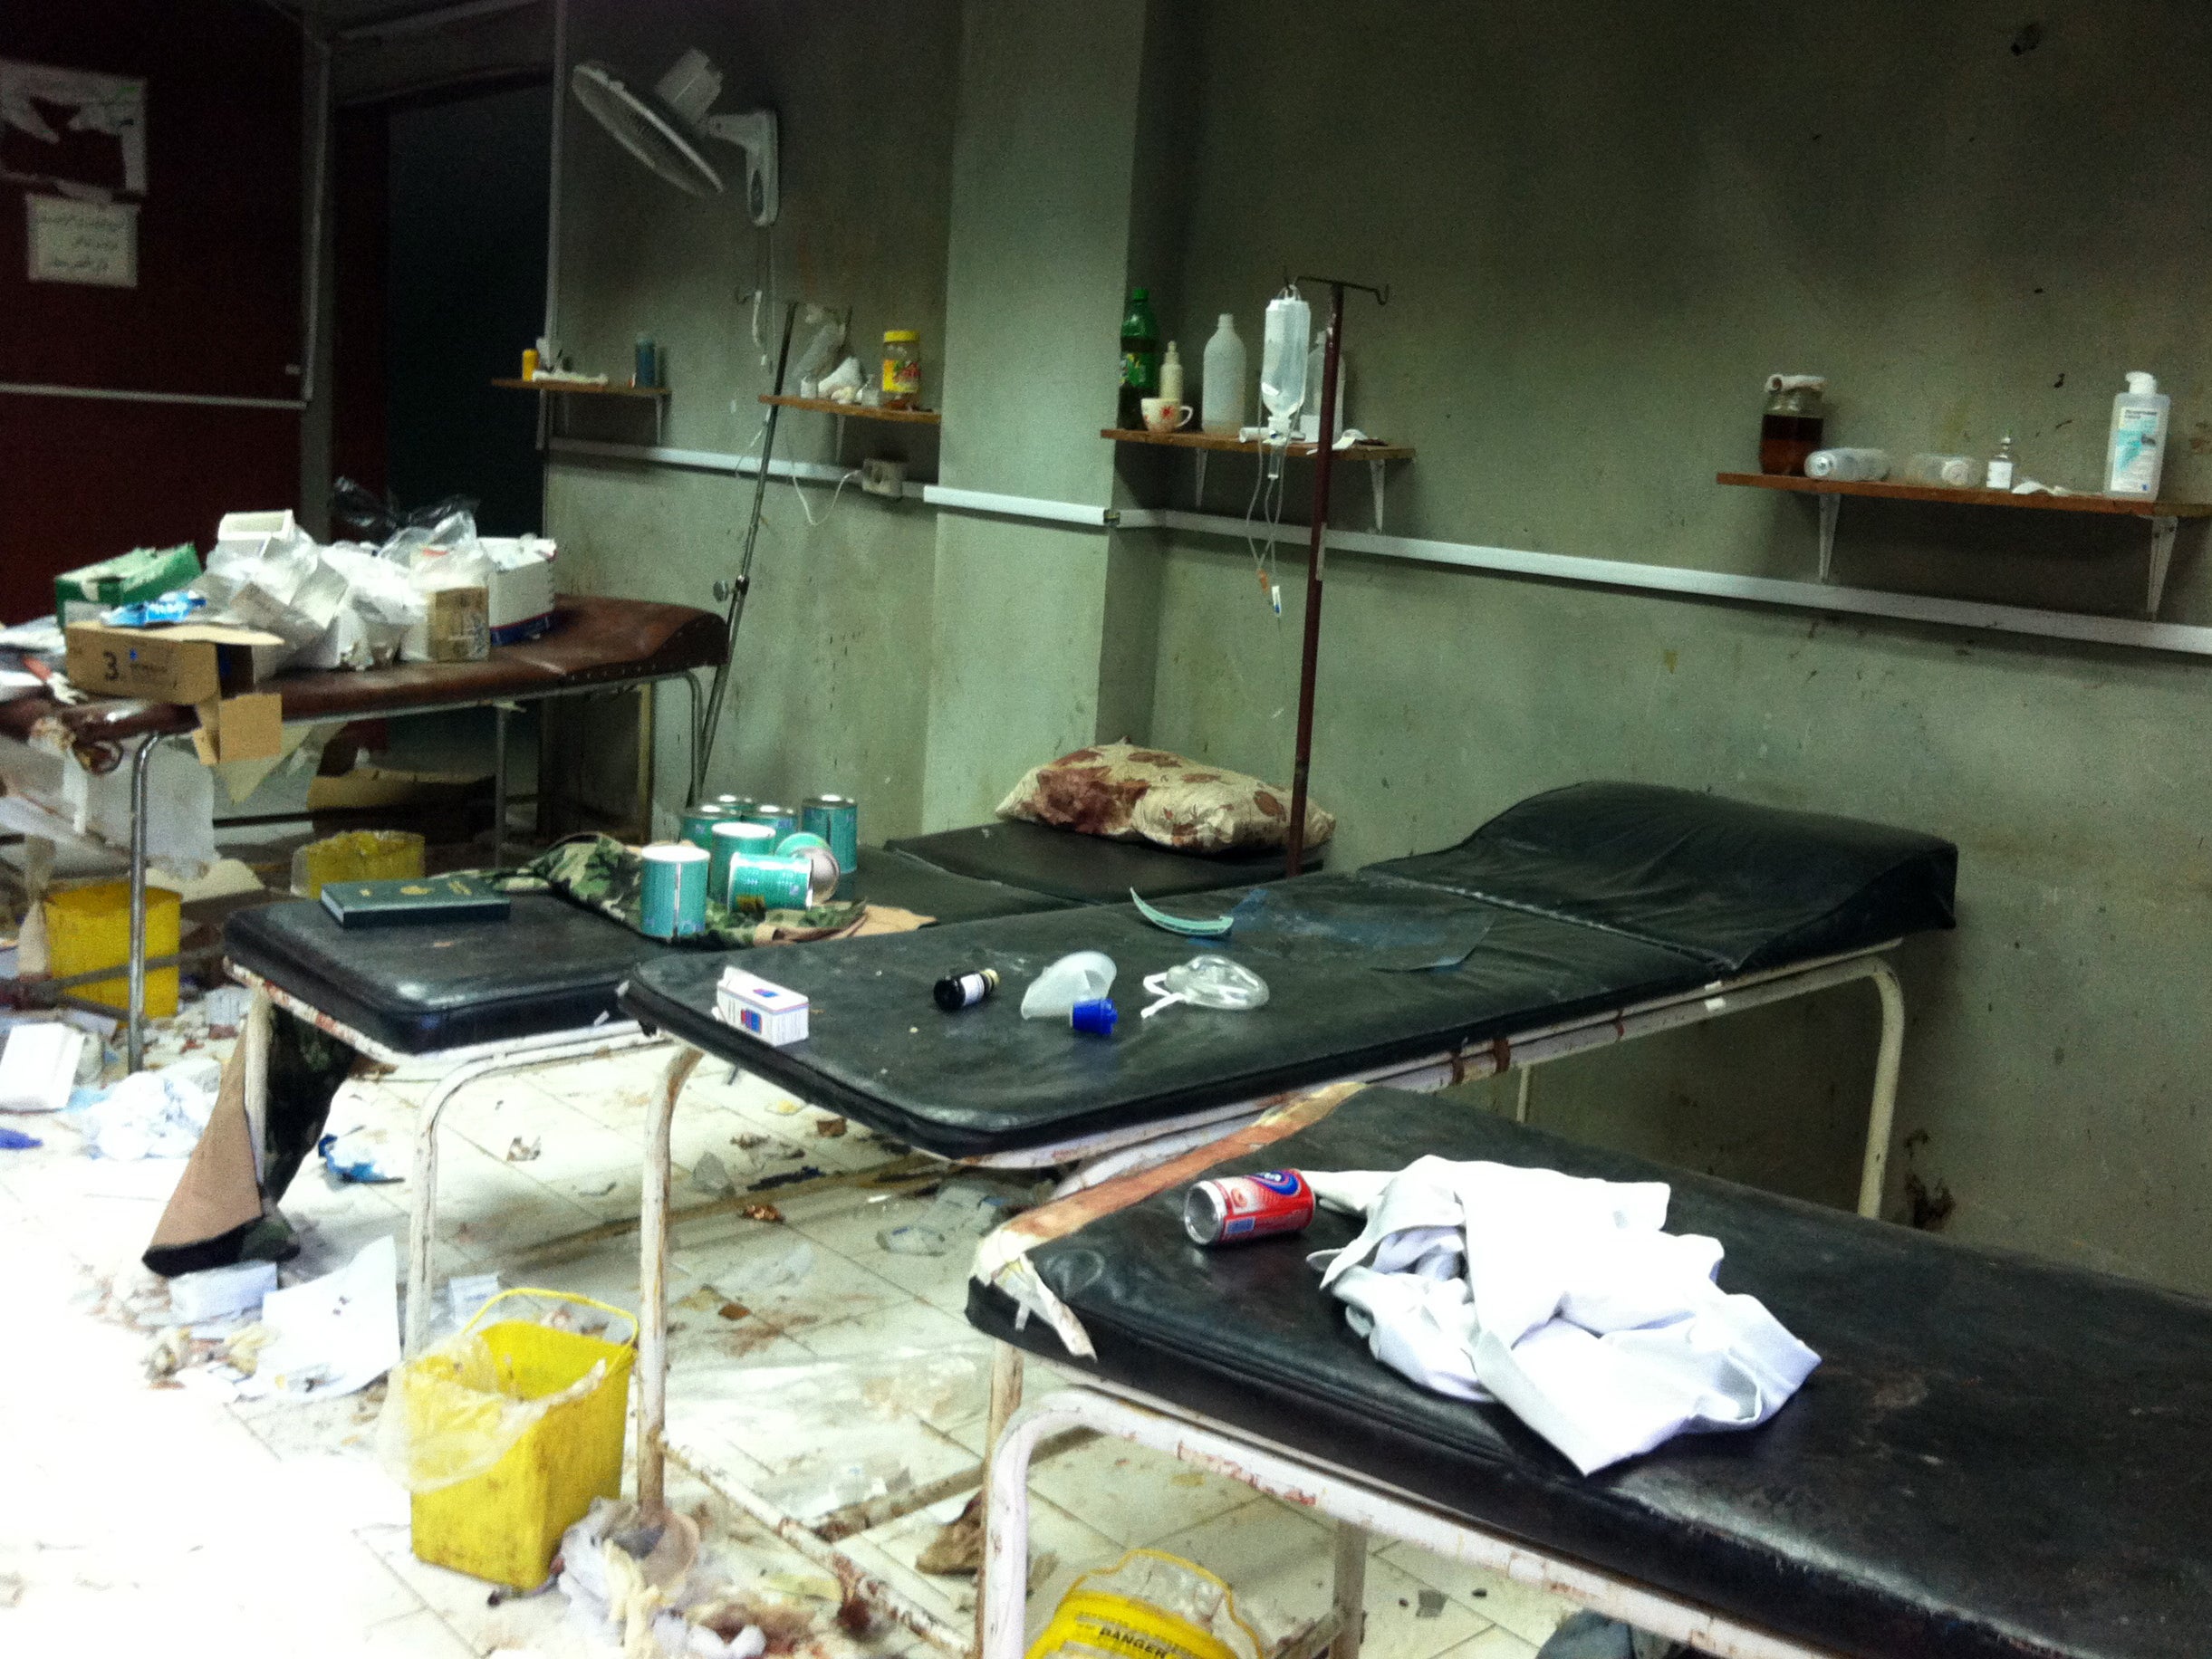 Doctors in Homs often have to work in appalling conditions